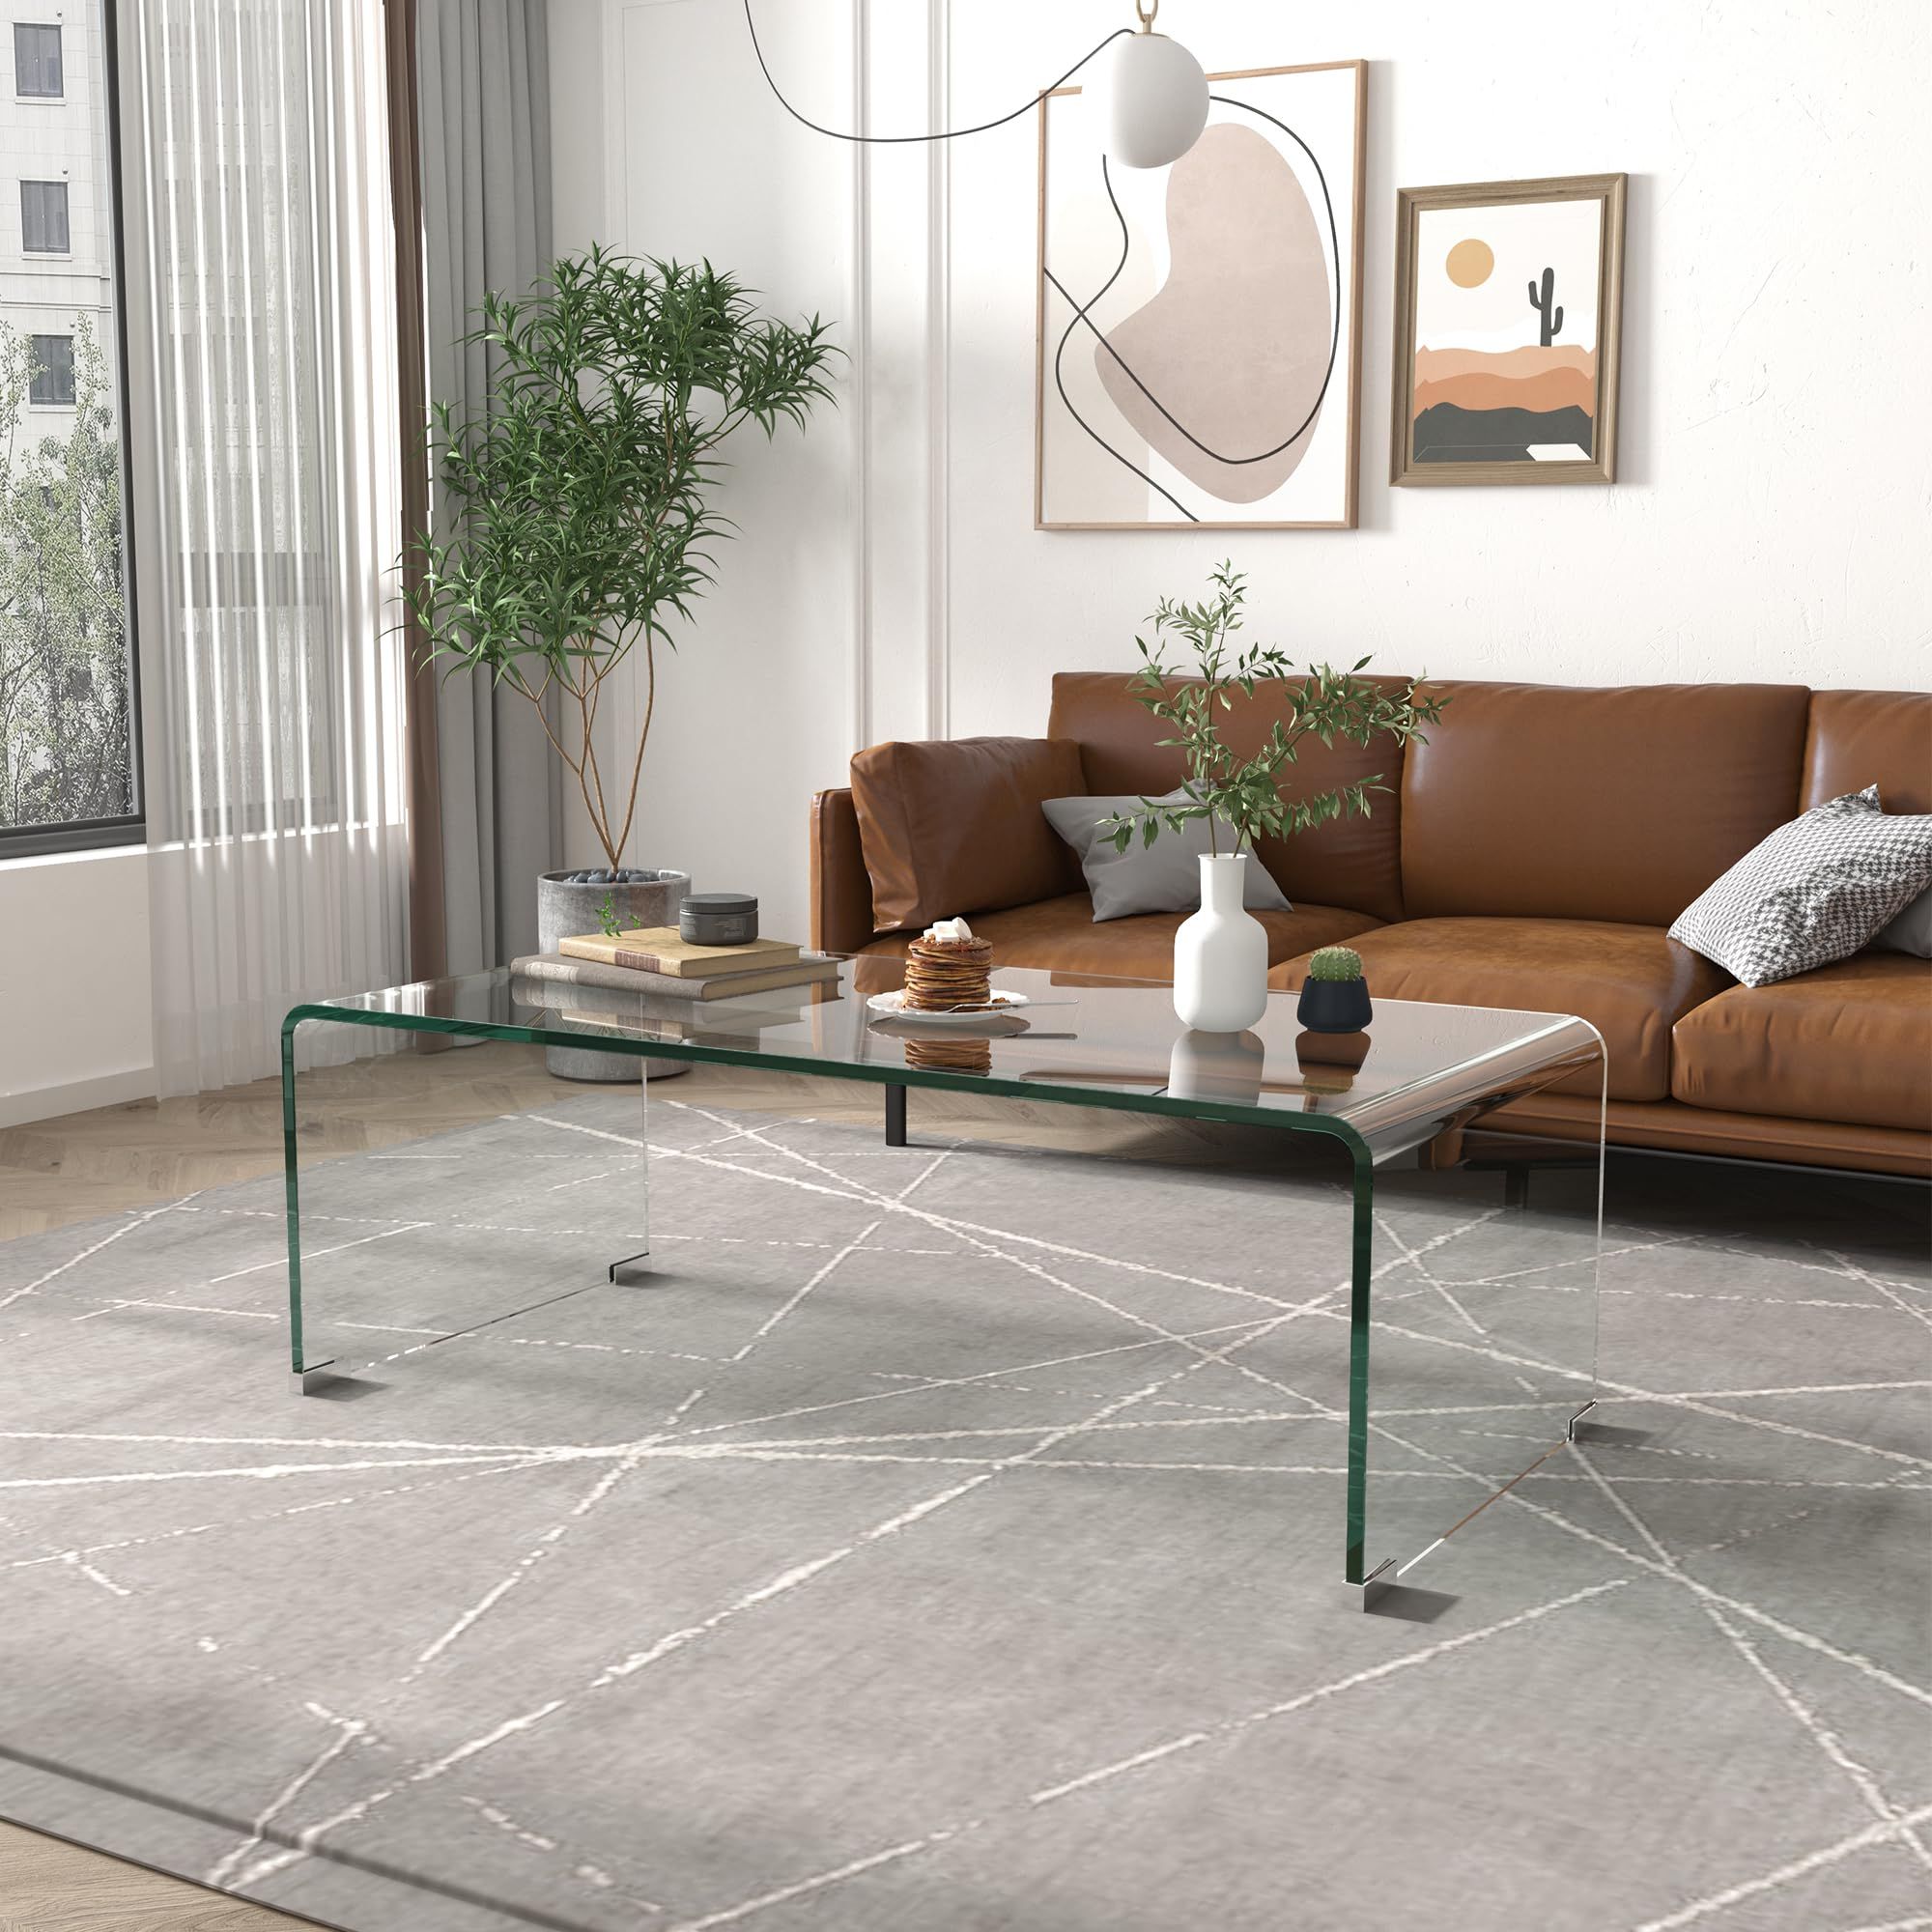 Tempered Glass Coffee Tables For Most Popular Amazon: Tempered Glass Coffee Table For Modern Living Room Decor, Easy  To Clean With Safe Rounded Edges And Durable Design, 39.3" L X 19.6" W X  13.78" H (tempered Glass N) : (Photo 9 of 10)